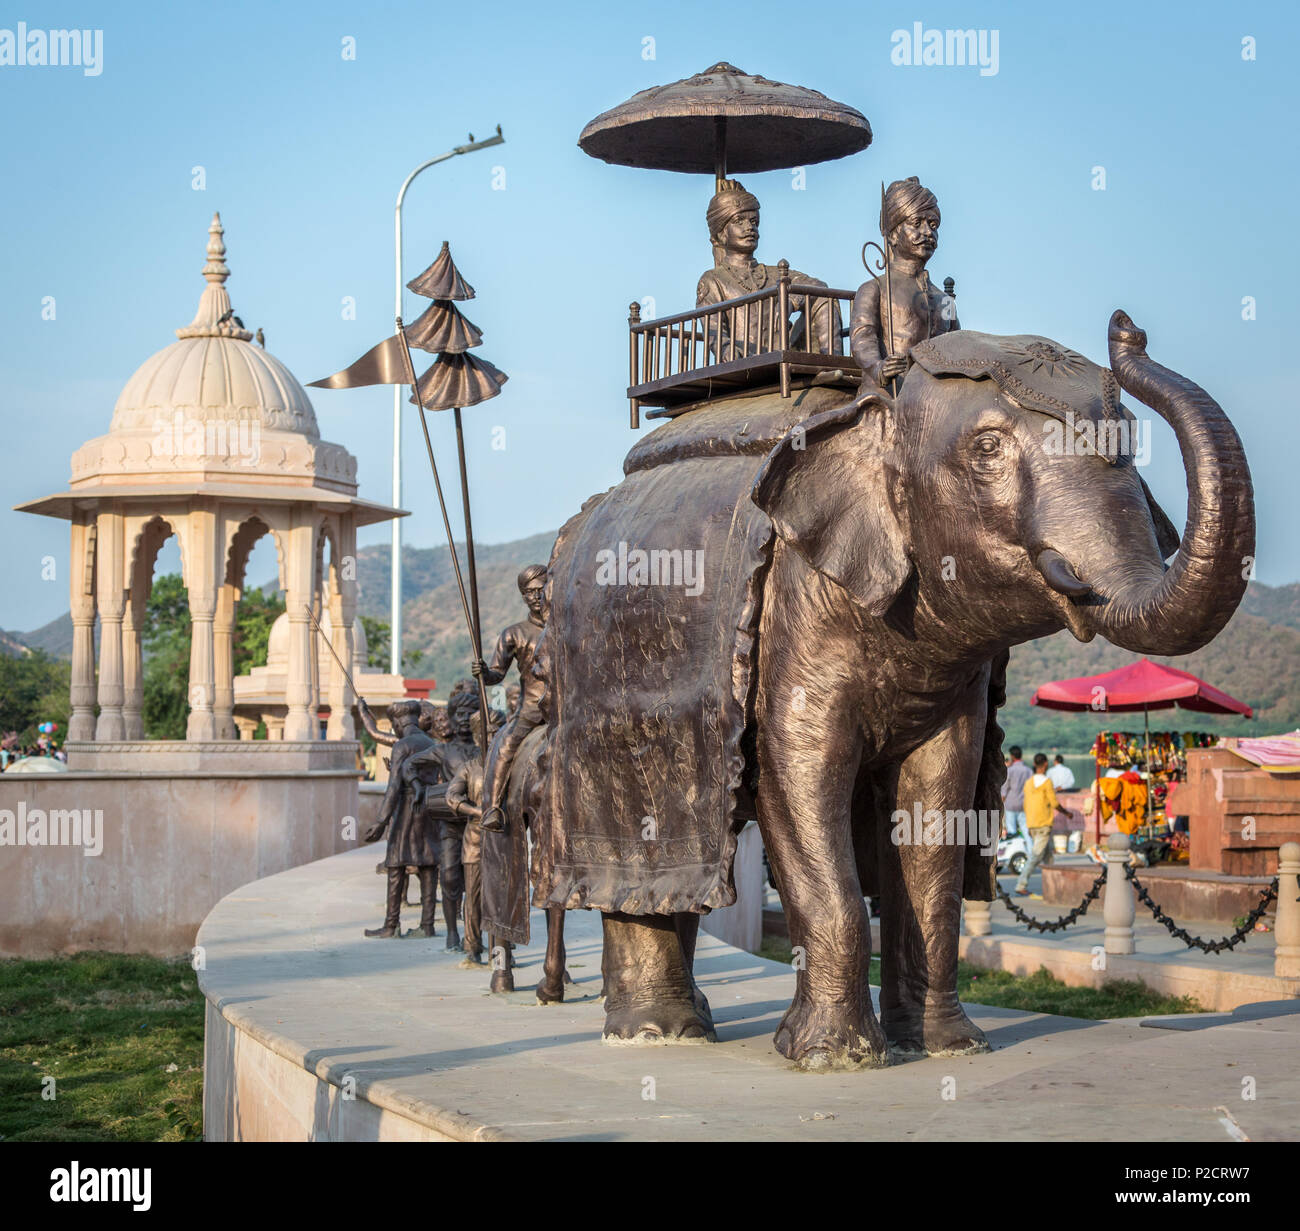 Indian Royal procession complete with elephant ride Statue on the street in Jaipur, India. Stock Photo